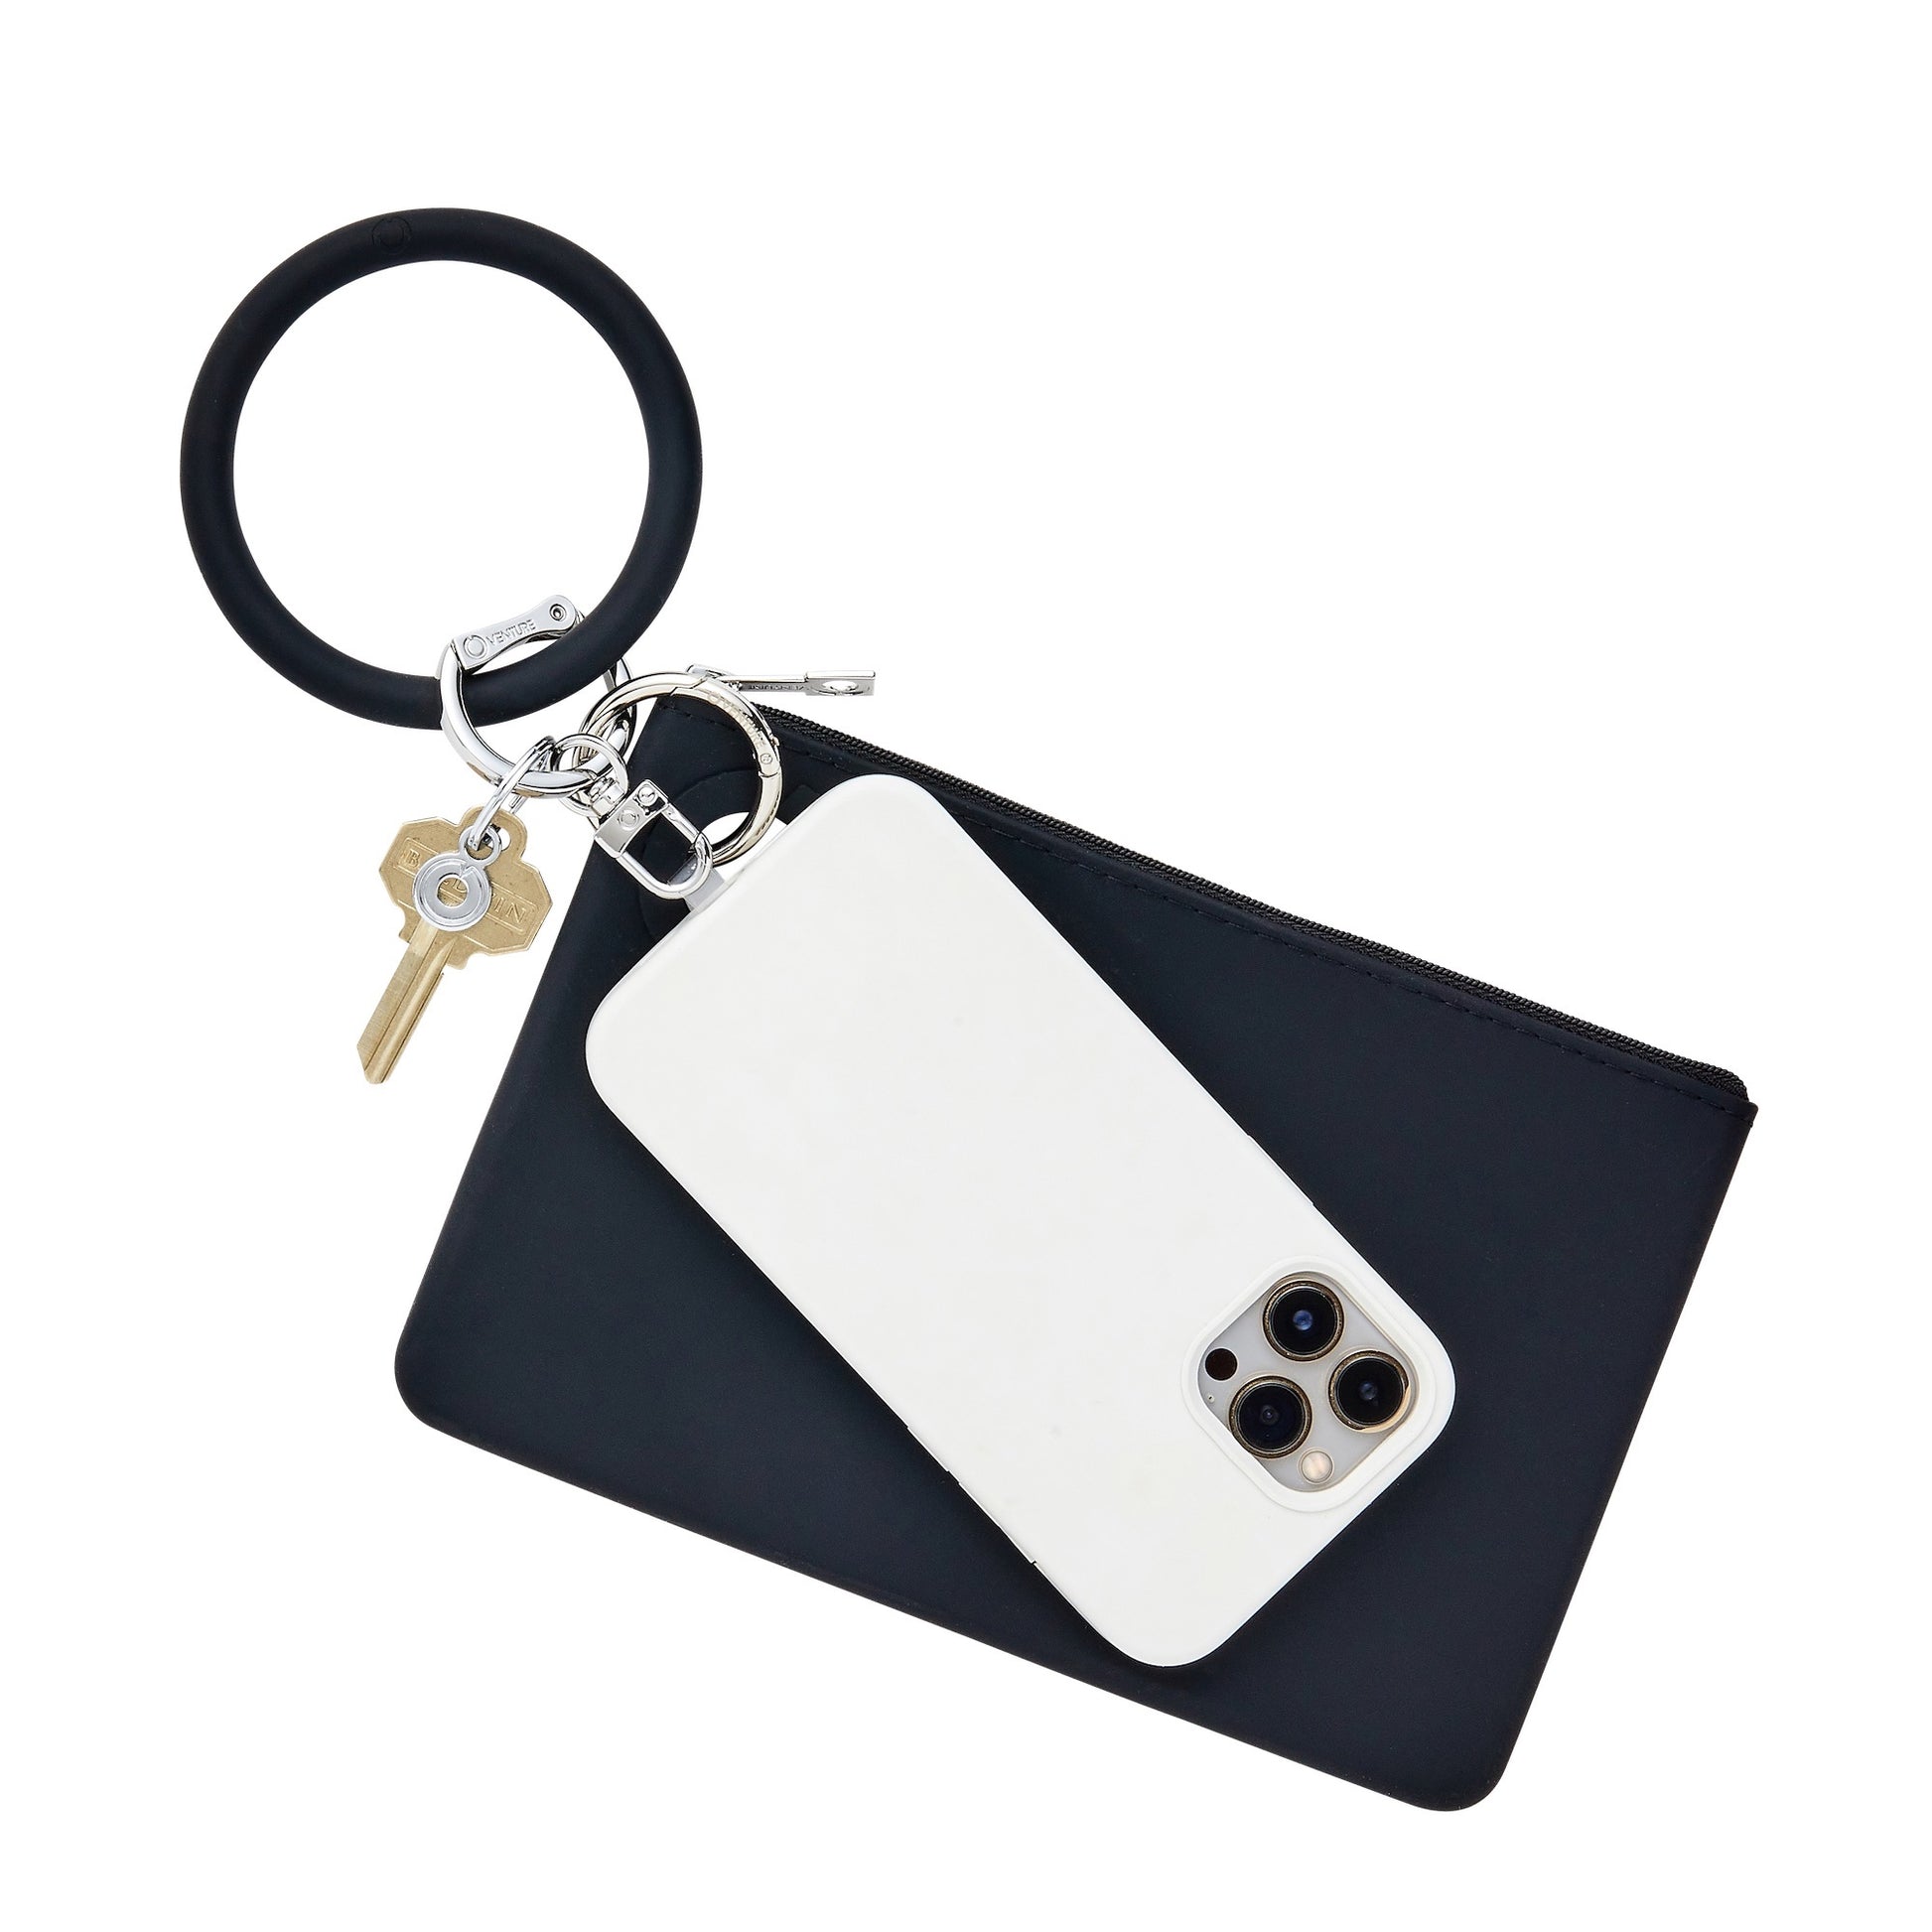 Big O Key Ring with large silicone pouch and Hook Me Up Phone connector.